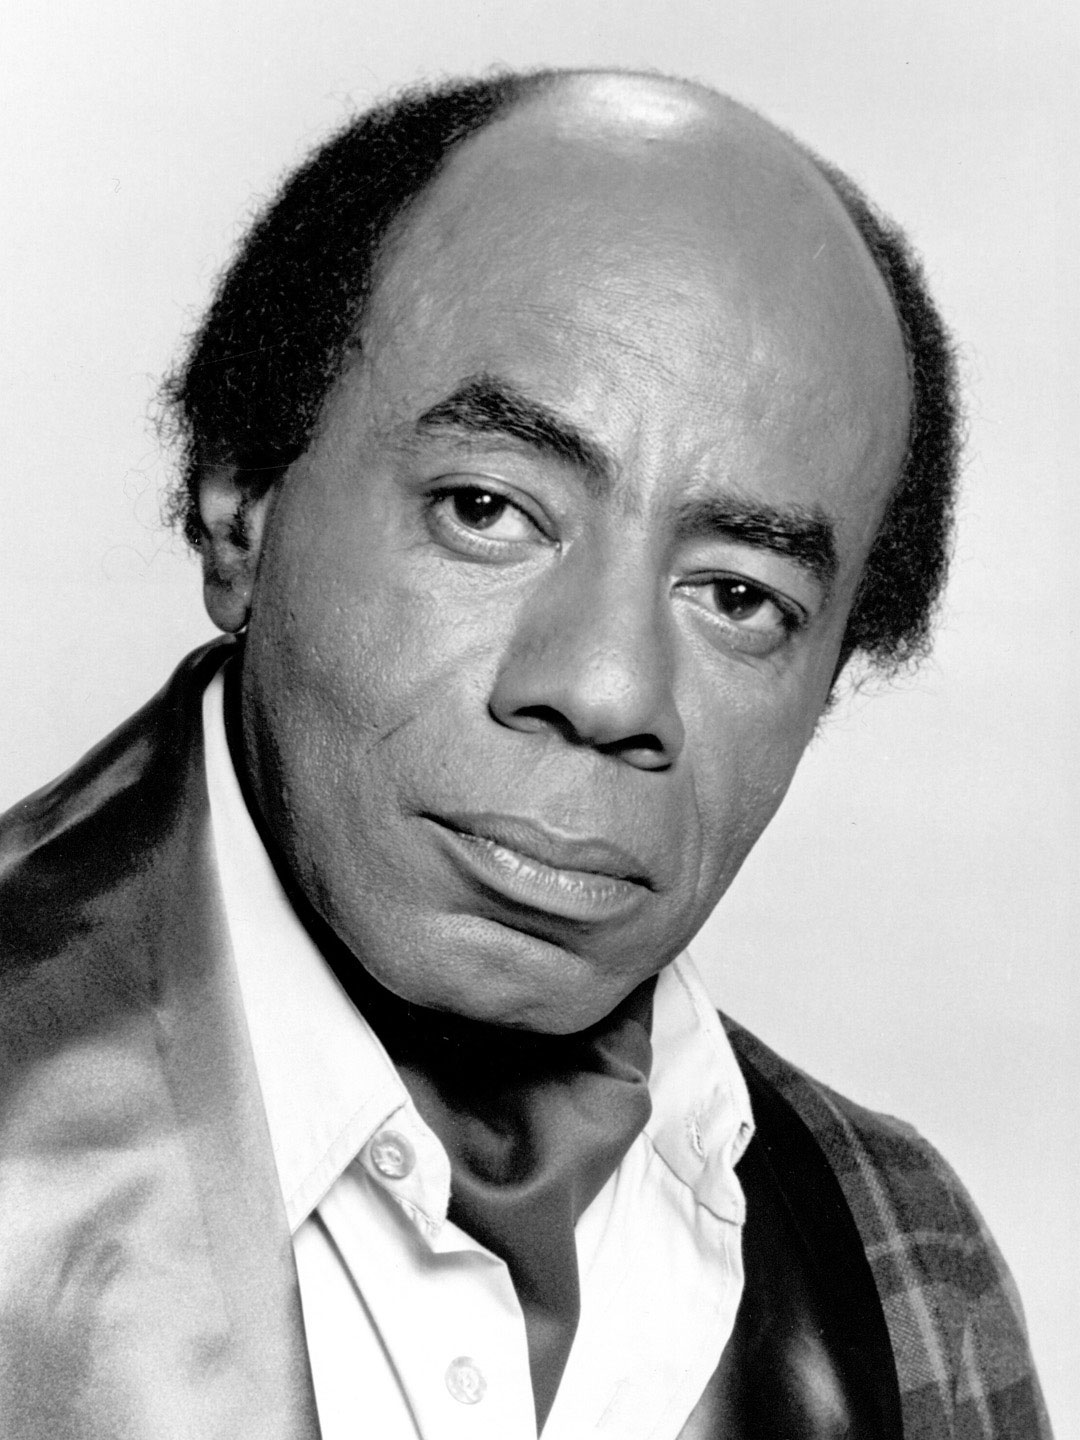 Roscoe Lee Browne - Rotten Tomatoes